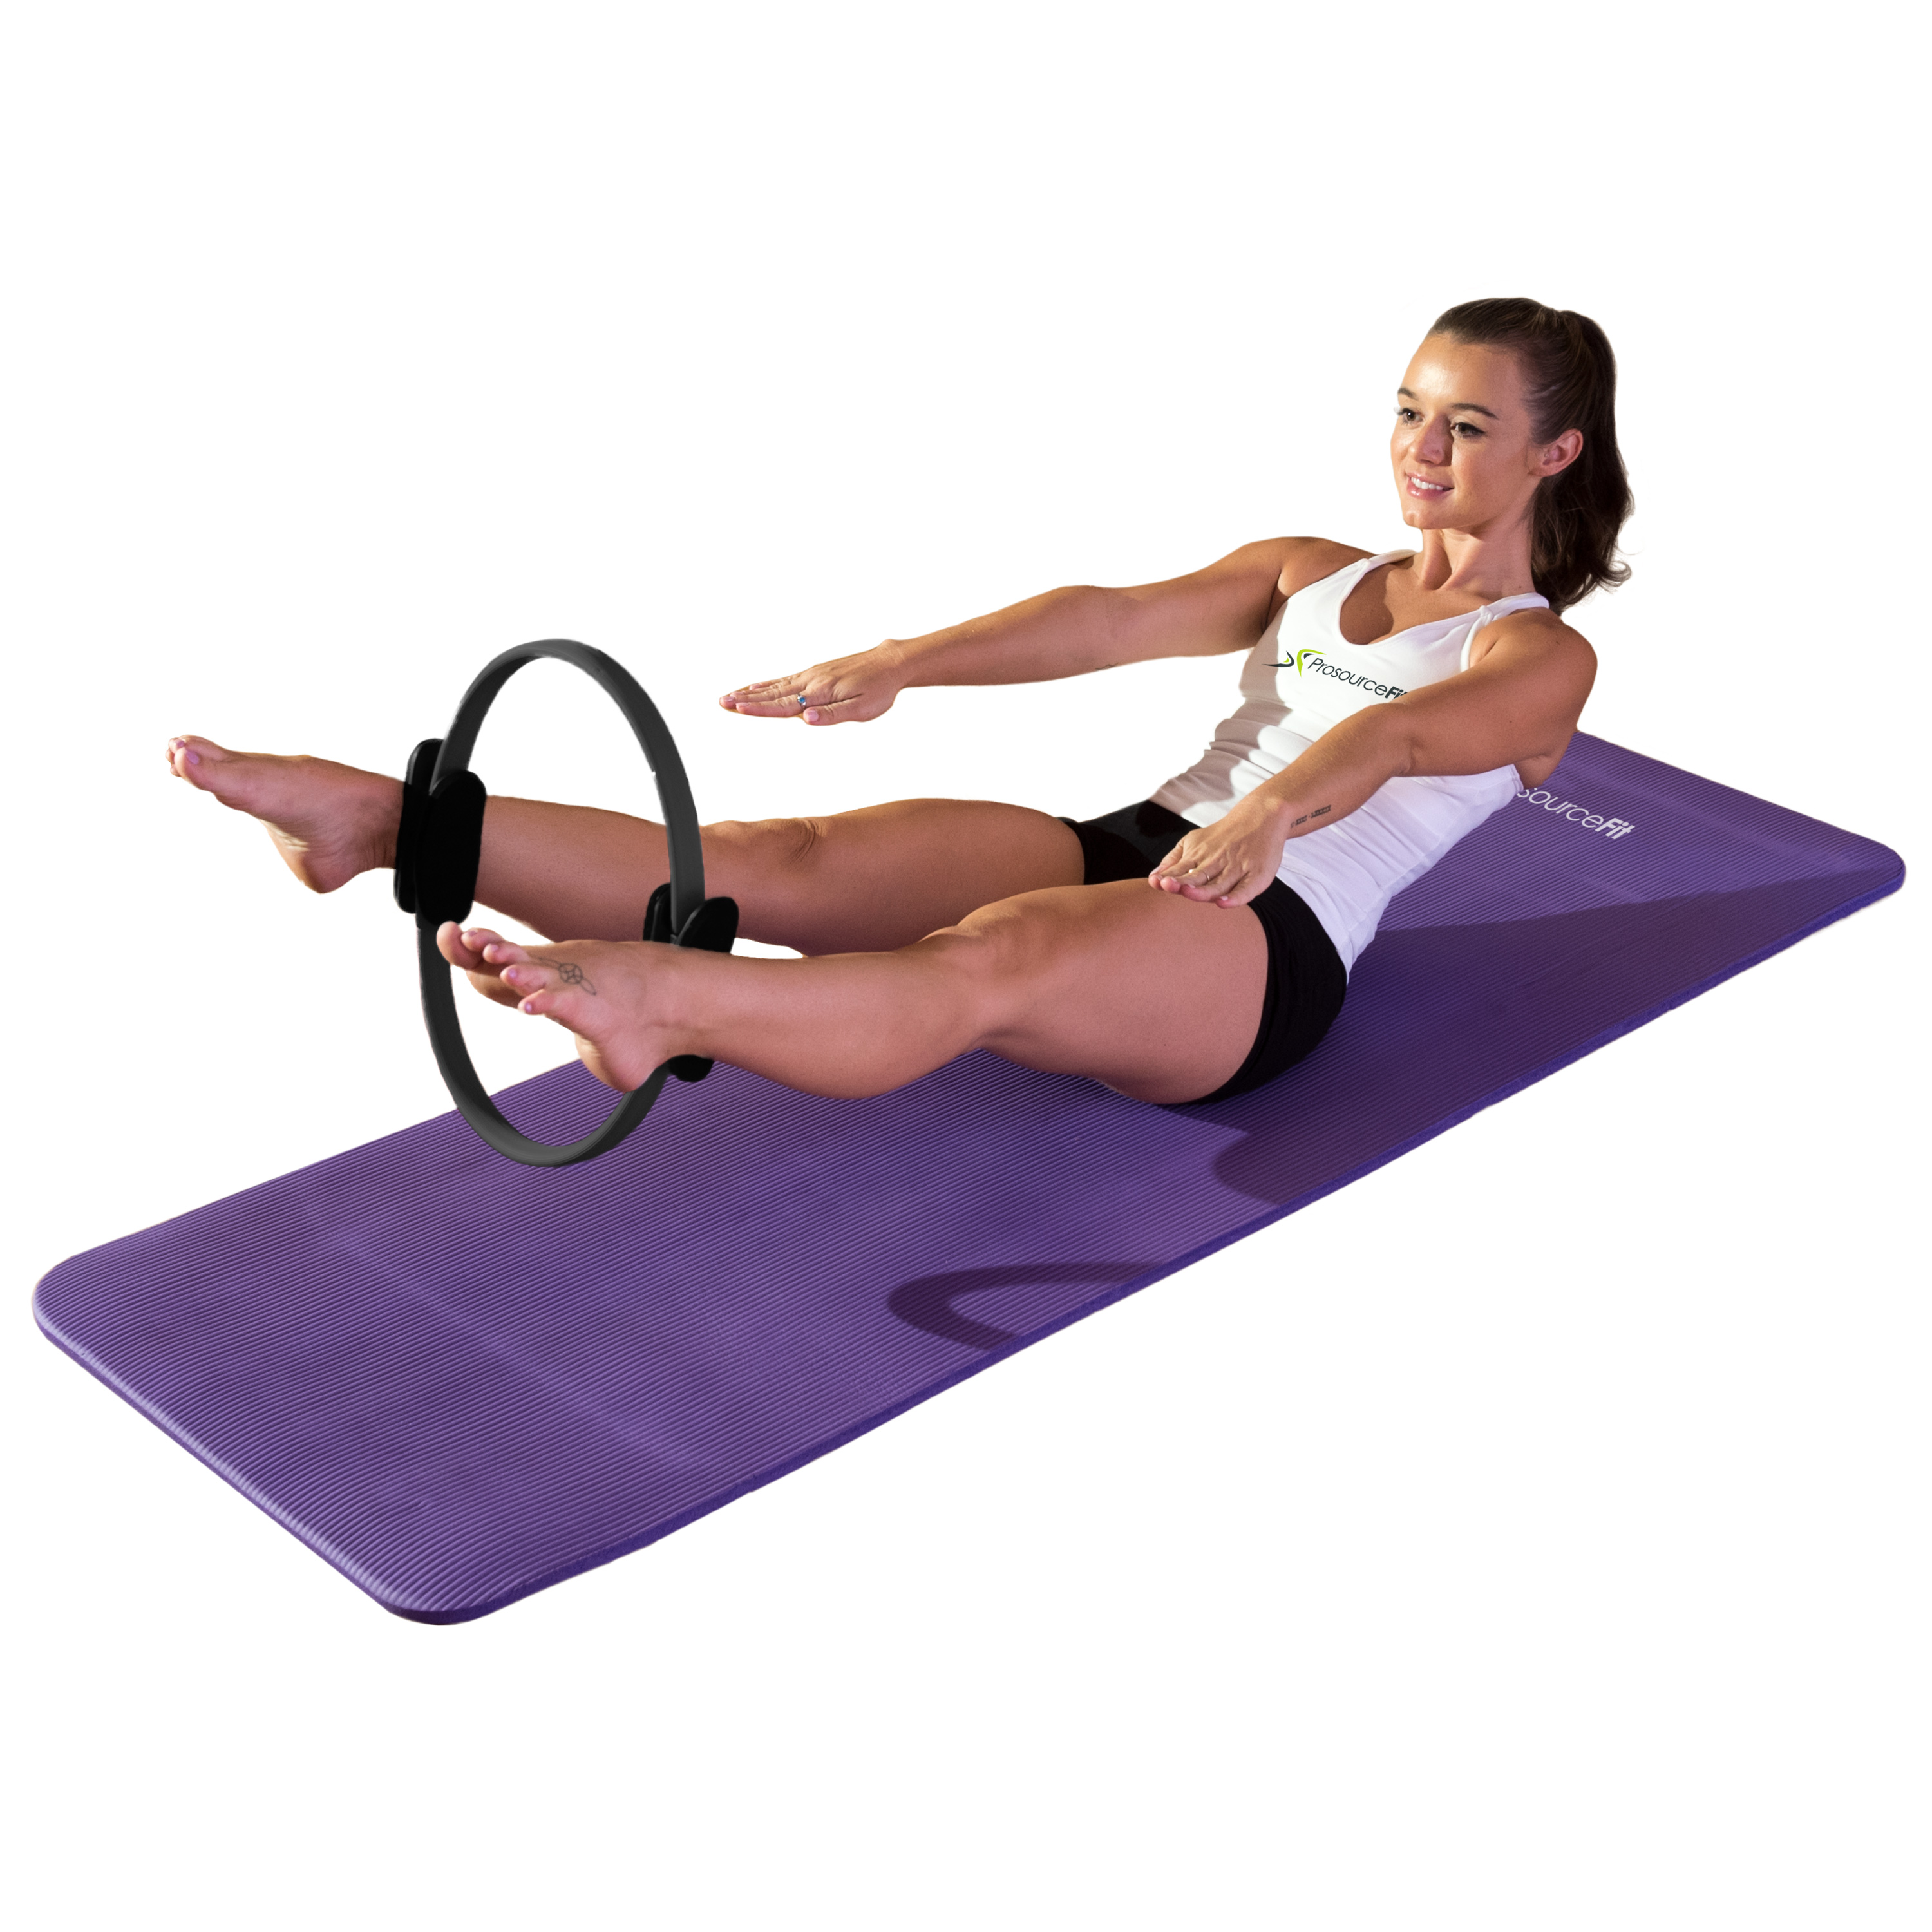 ProsourceFit 14-in Diameter Pilates Resistance Ring with Dual Grip Handles - image 4 of 6